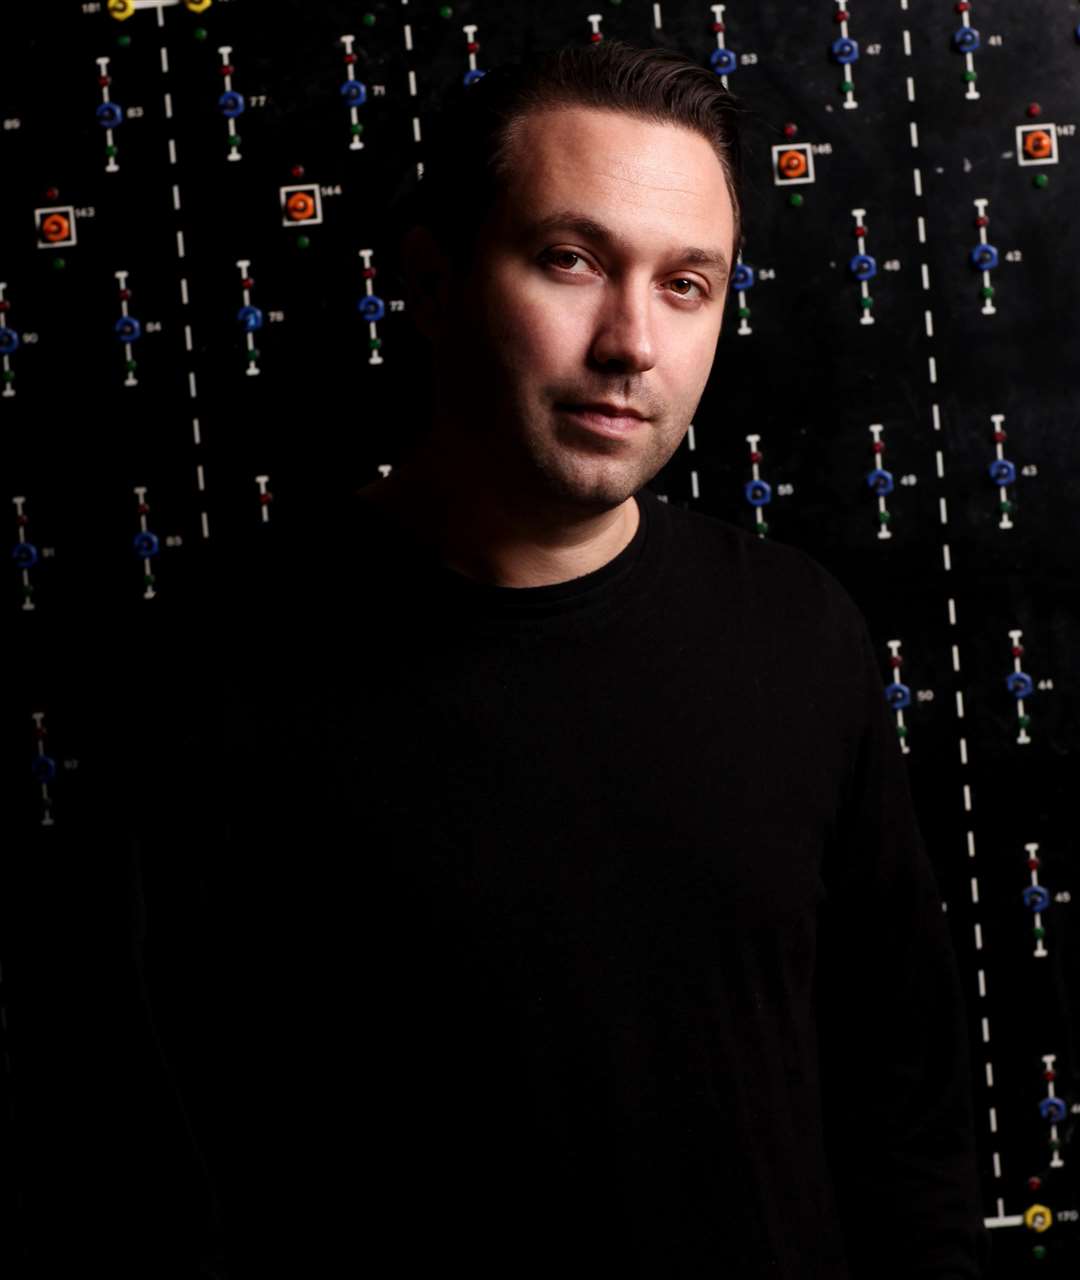 Nic Fanciulli, from West Malling